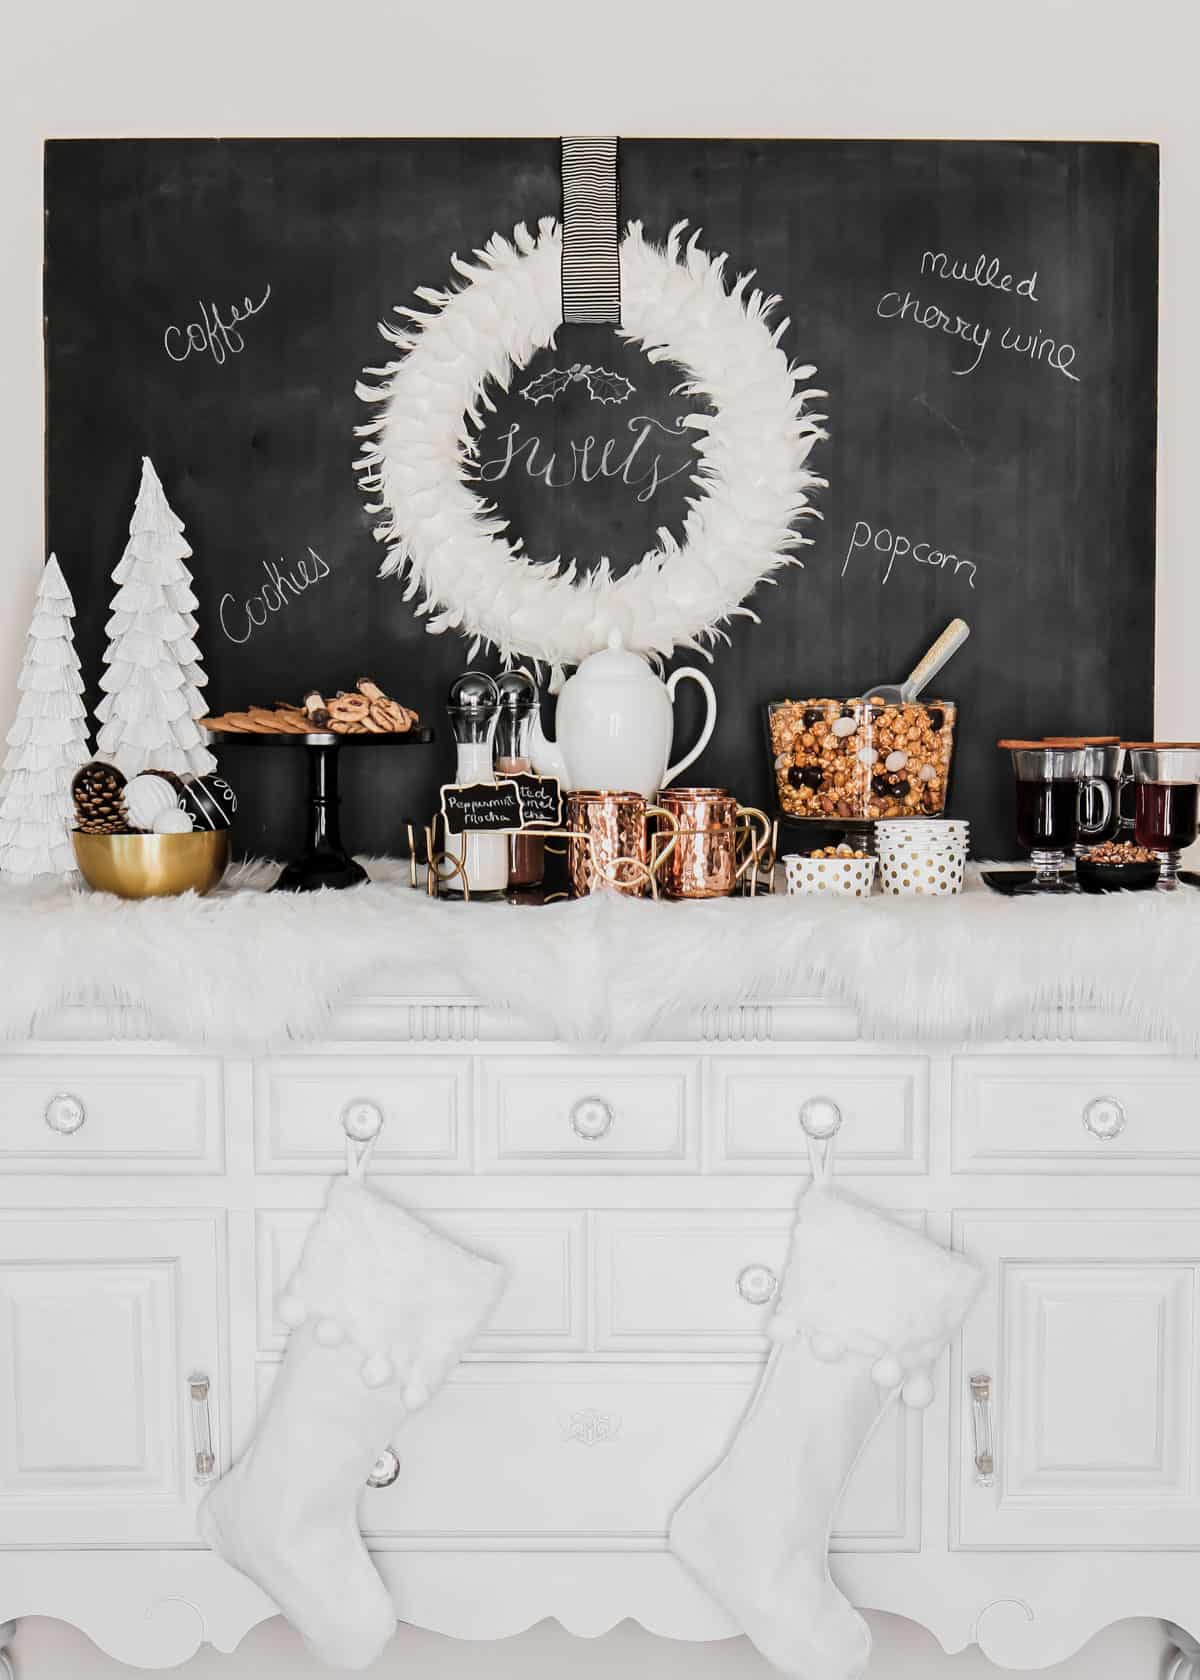 white buffet table with desserts and drinks with chalkboard sign and white wreath on wall.